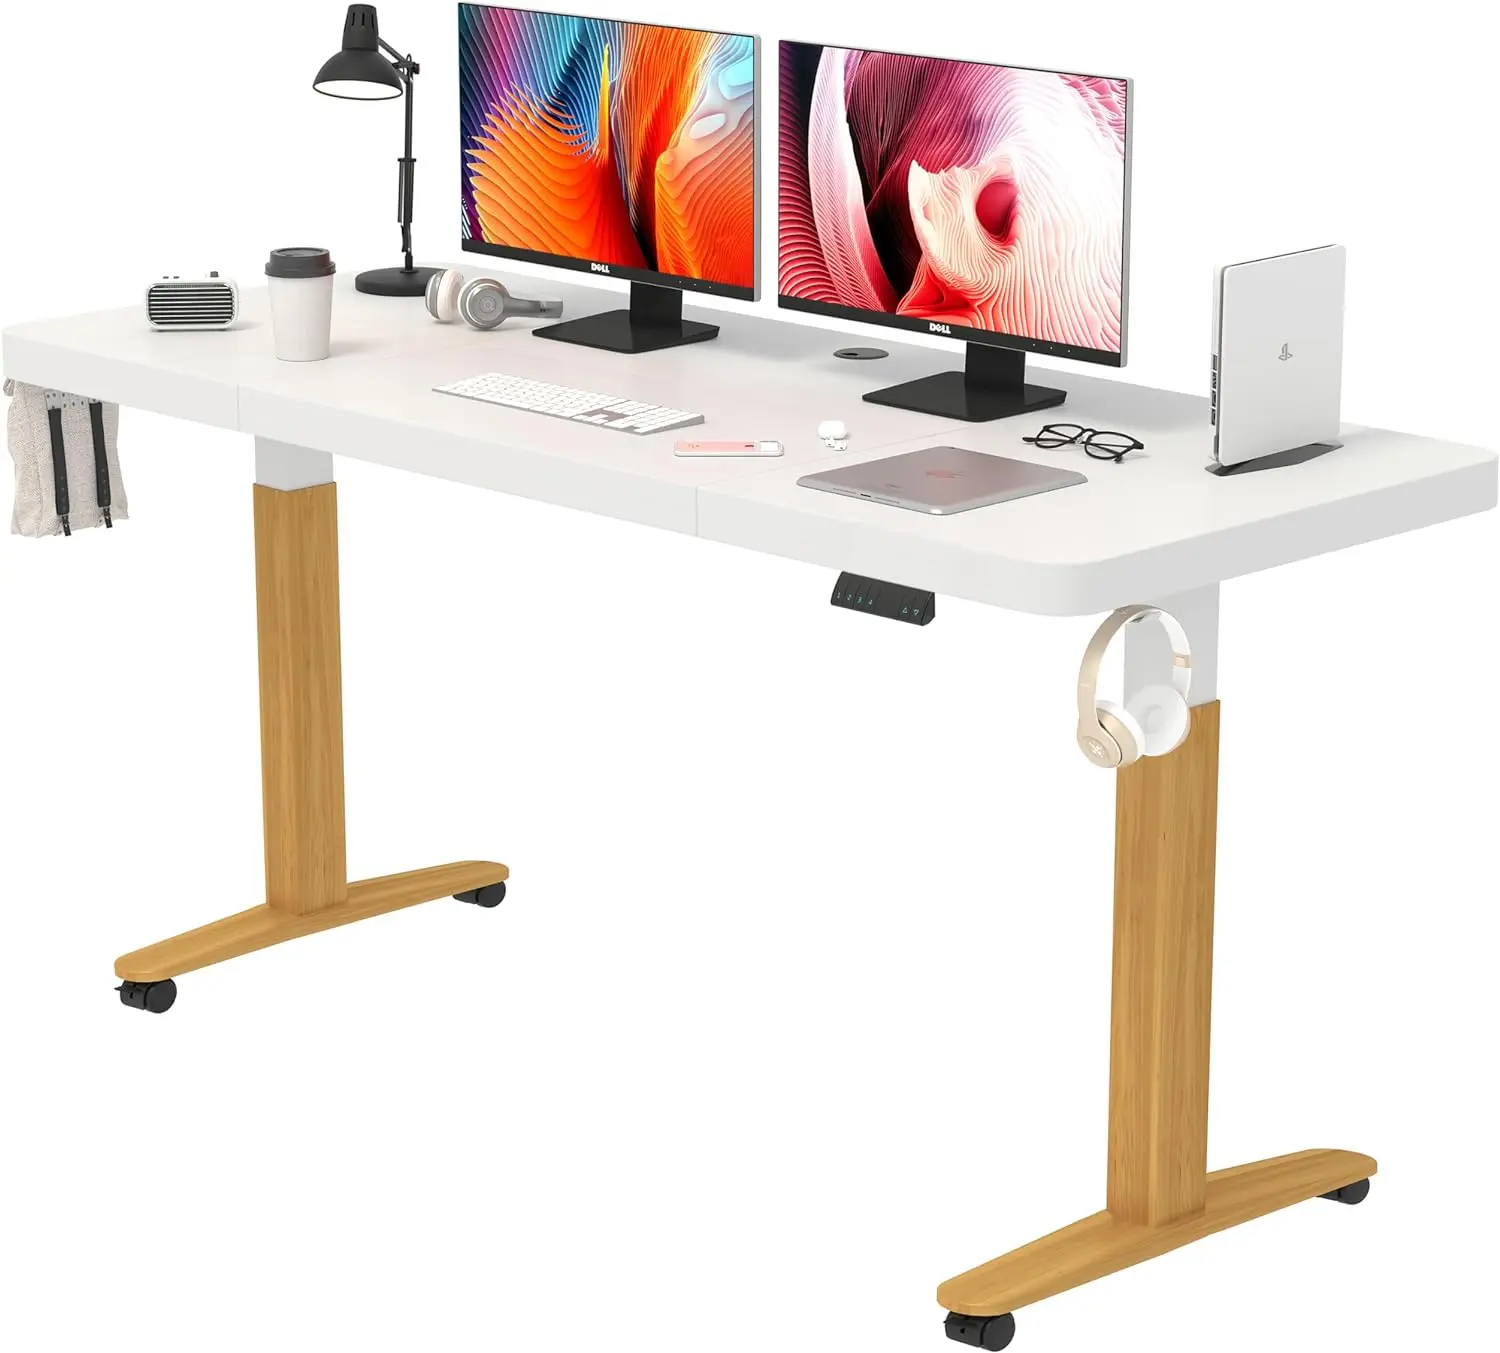 

Electric Standing Desk, 55 x 28 inches Height Adjustable Desk, Ergonomic Home Office Sit Stand Up Desk with Memory Preset